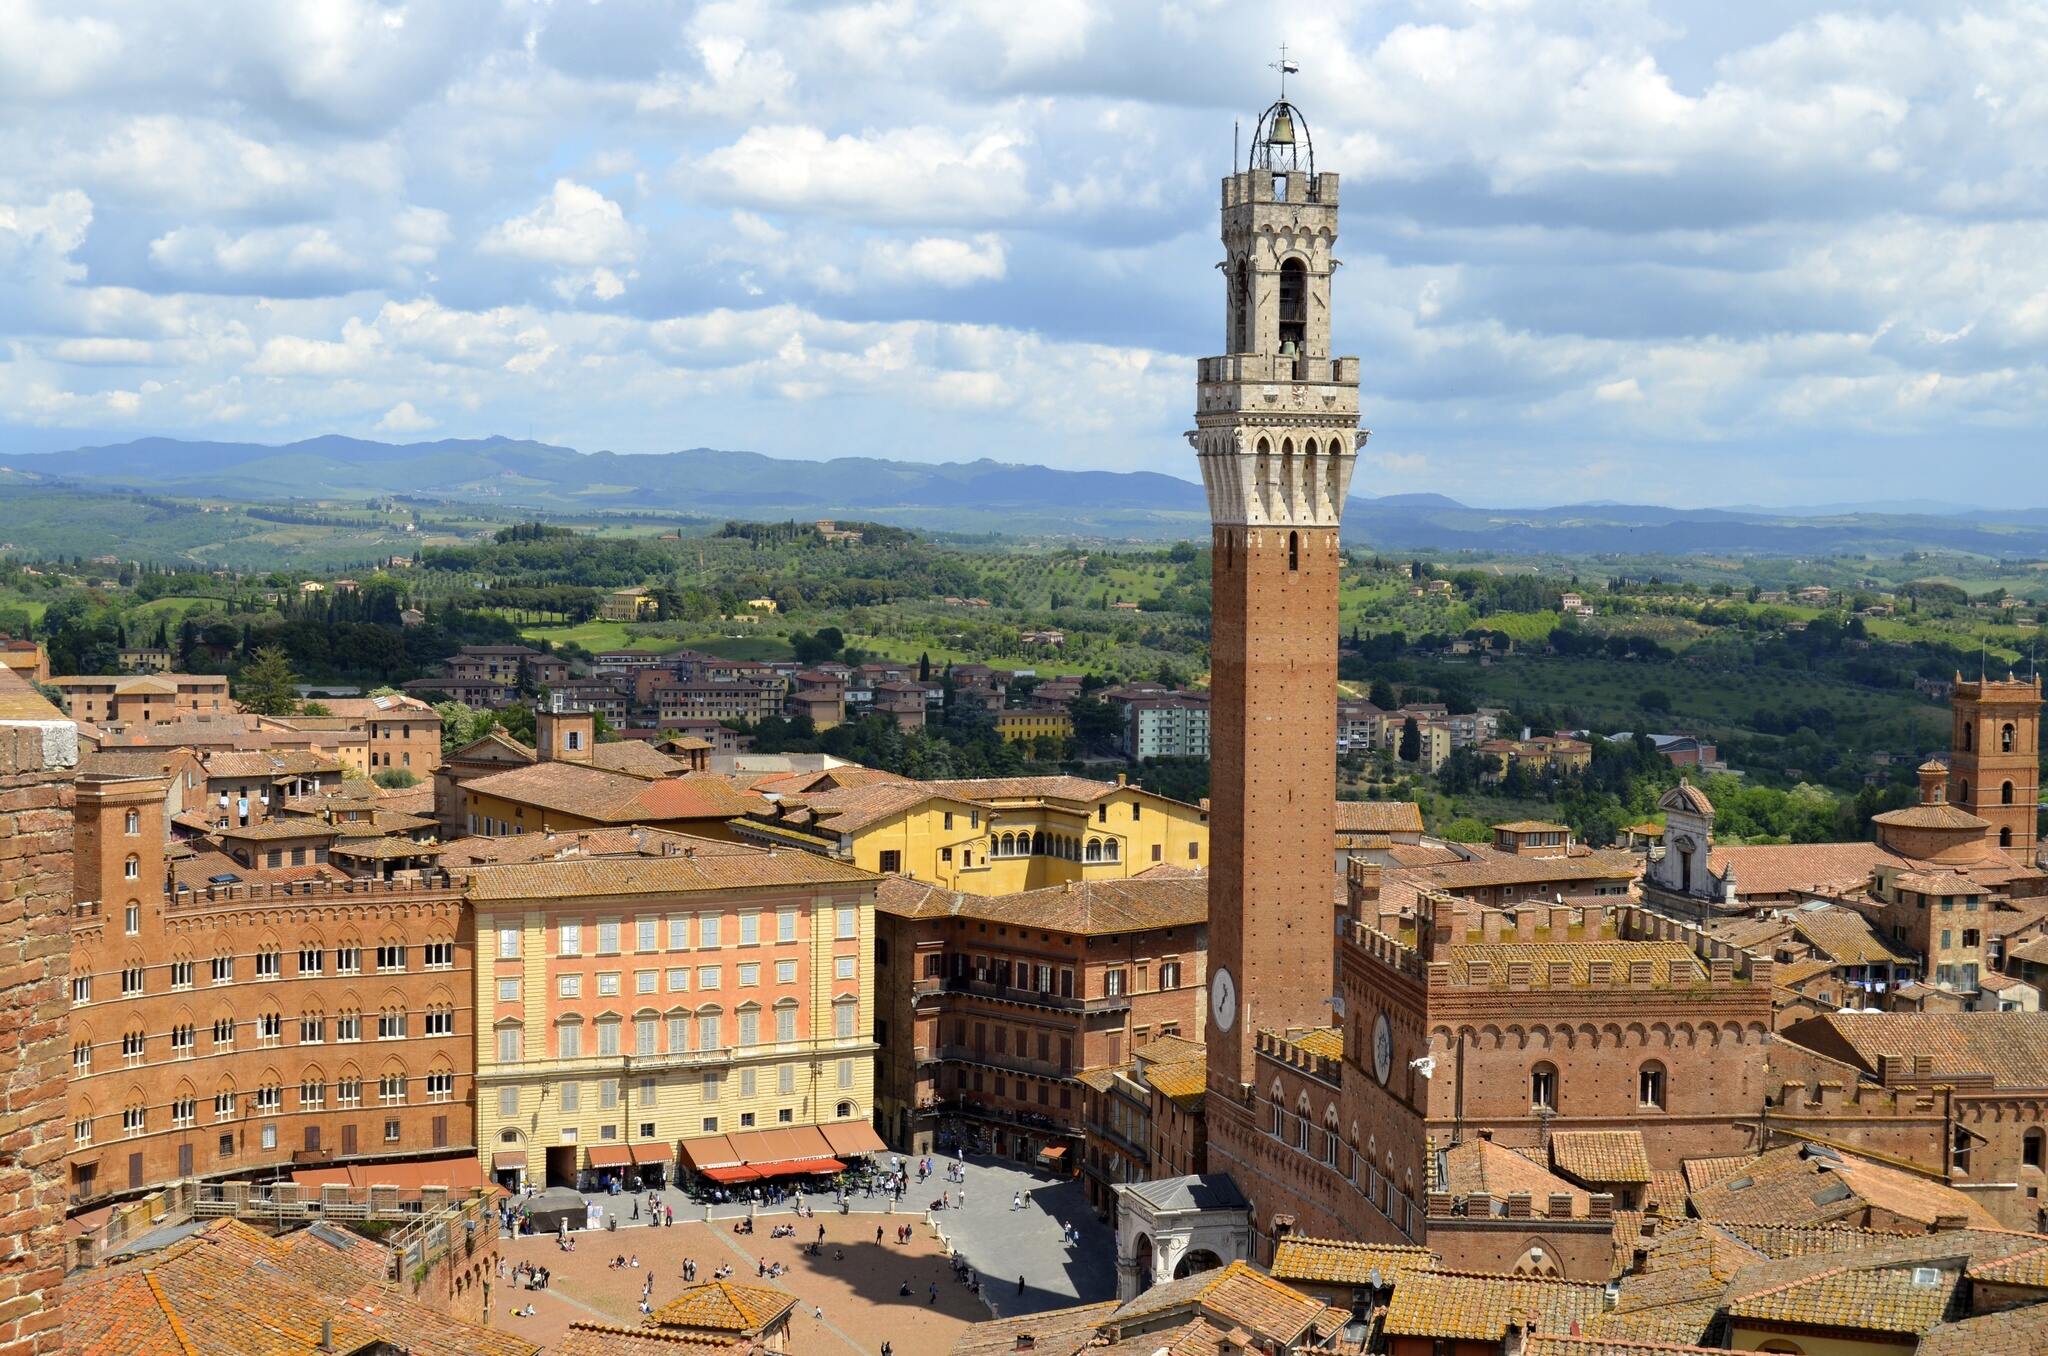 Siena, Tuscany, Italy. The Torre del Mangia is shown.